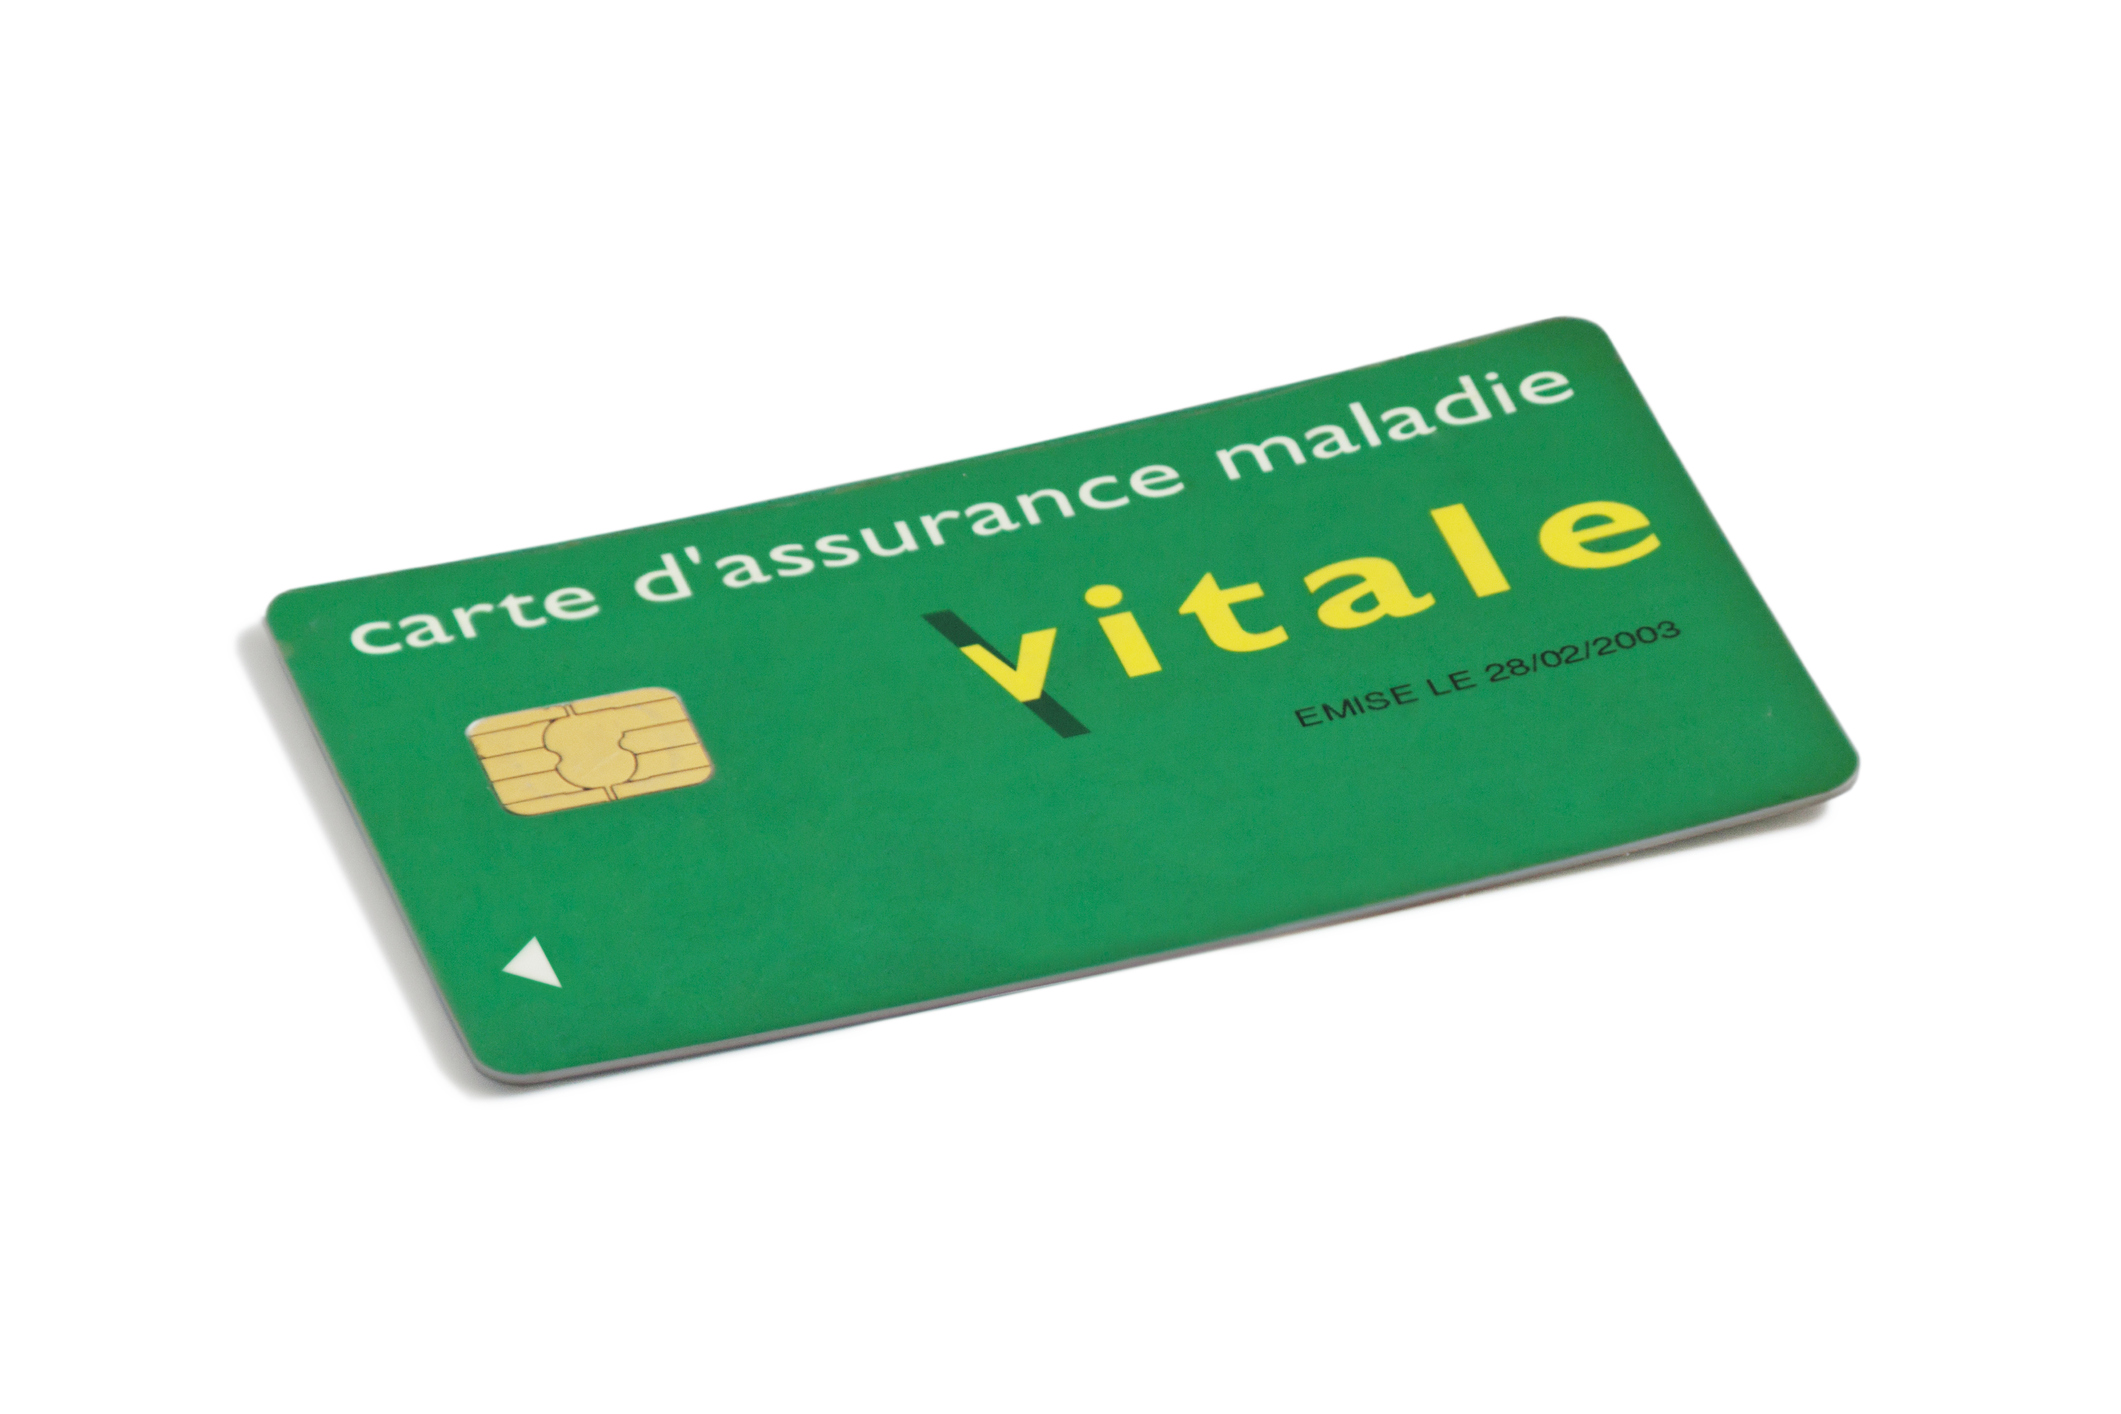 French health insurance: a new app in test